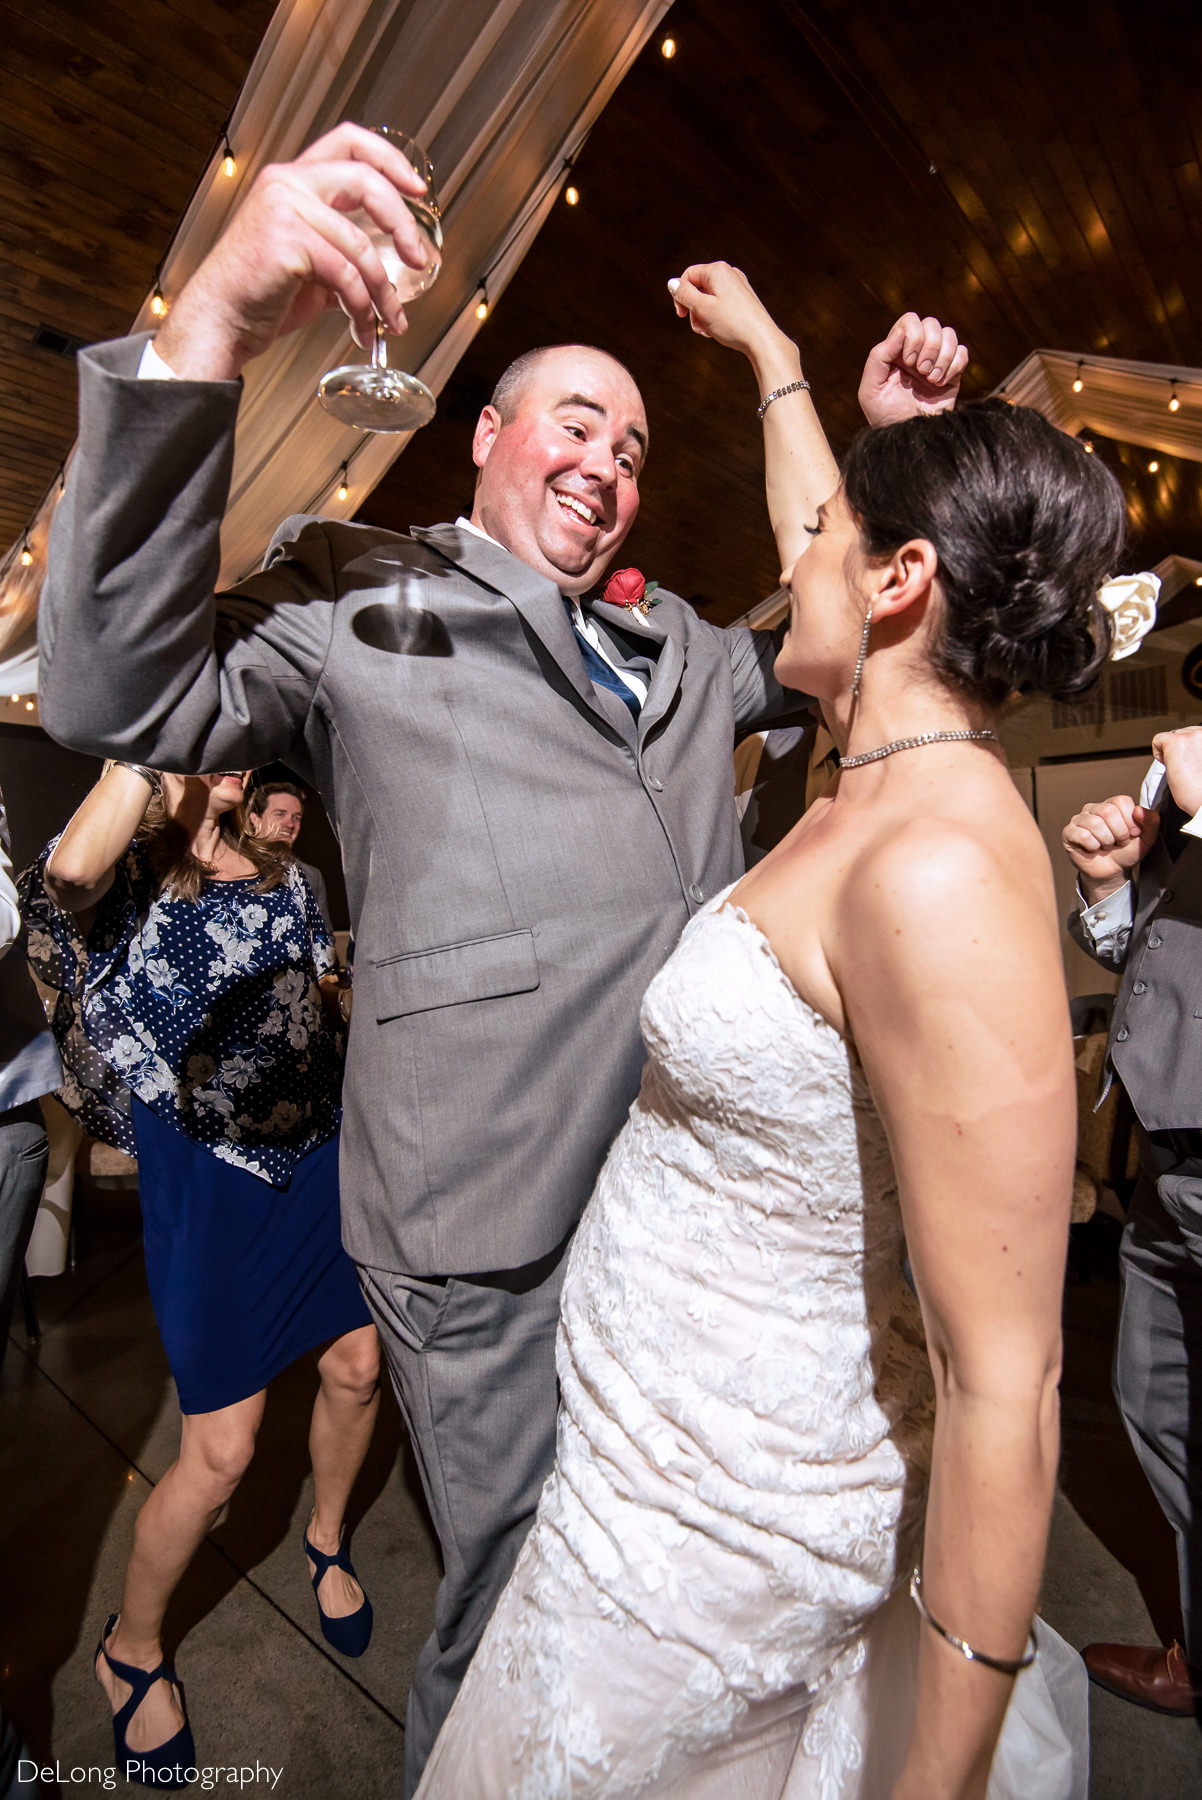 Up close image of bride and groom breaking it down on the dance floor during their reception at Childress Vineyards by Charlotte Wedding Photographers DeLong Photography